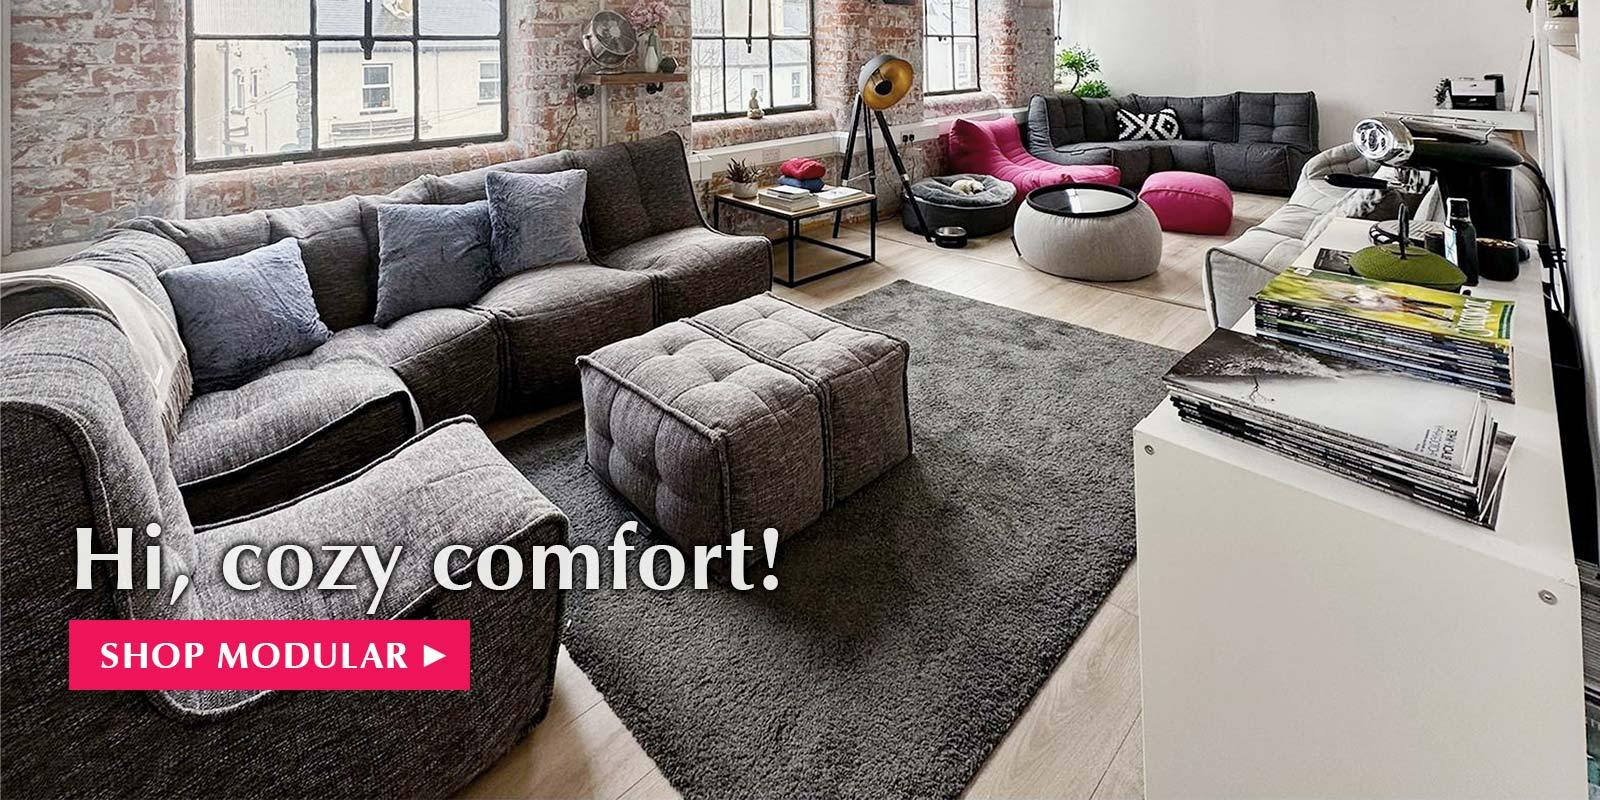 Transform your home into a welcoming oasis of comfort with Modular.